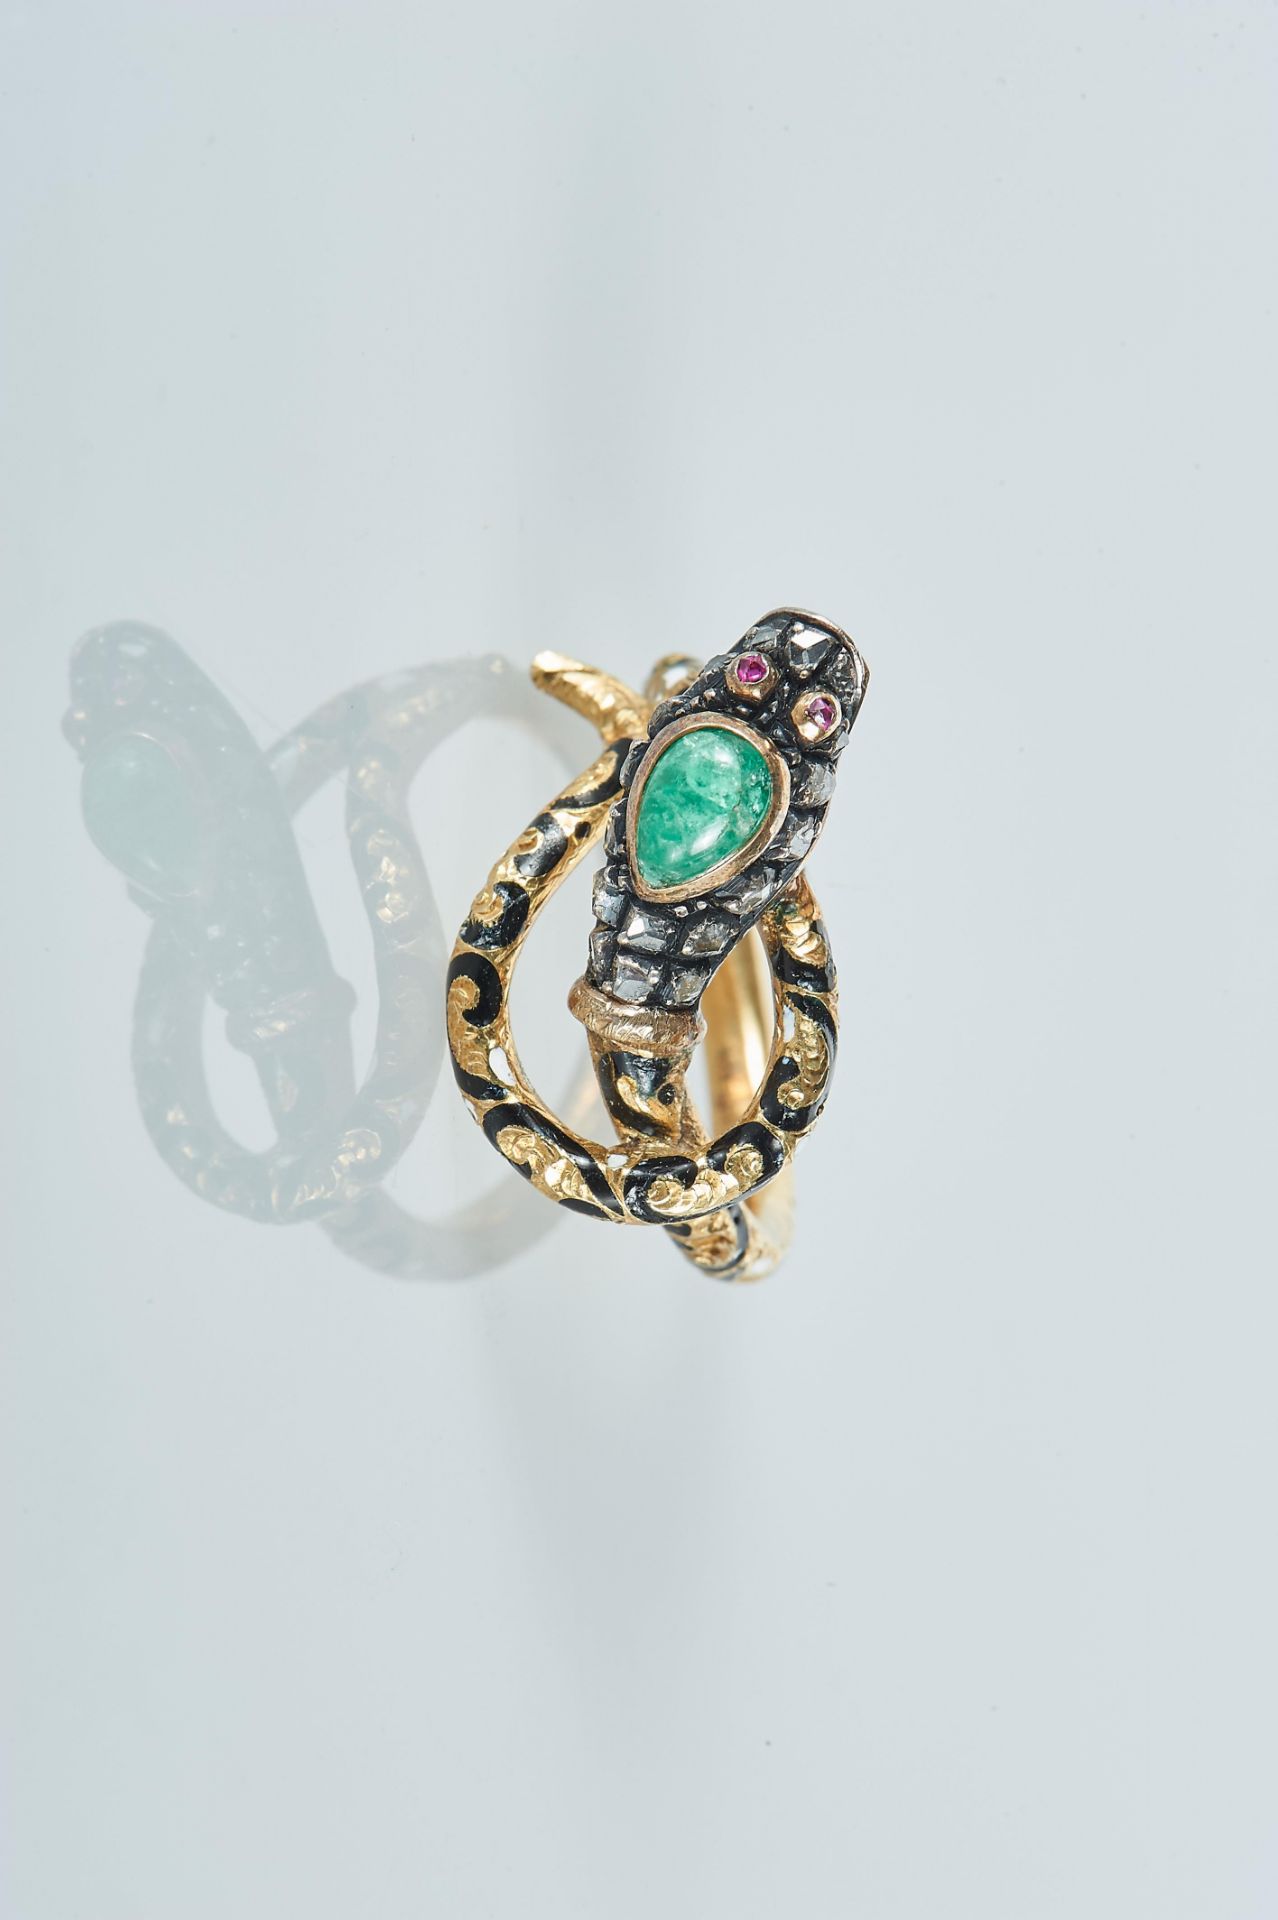 A Ring "Snake", 800/1000 gold and 833/1000 silver, decorated with enamel and set with an emerald,